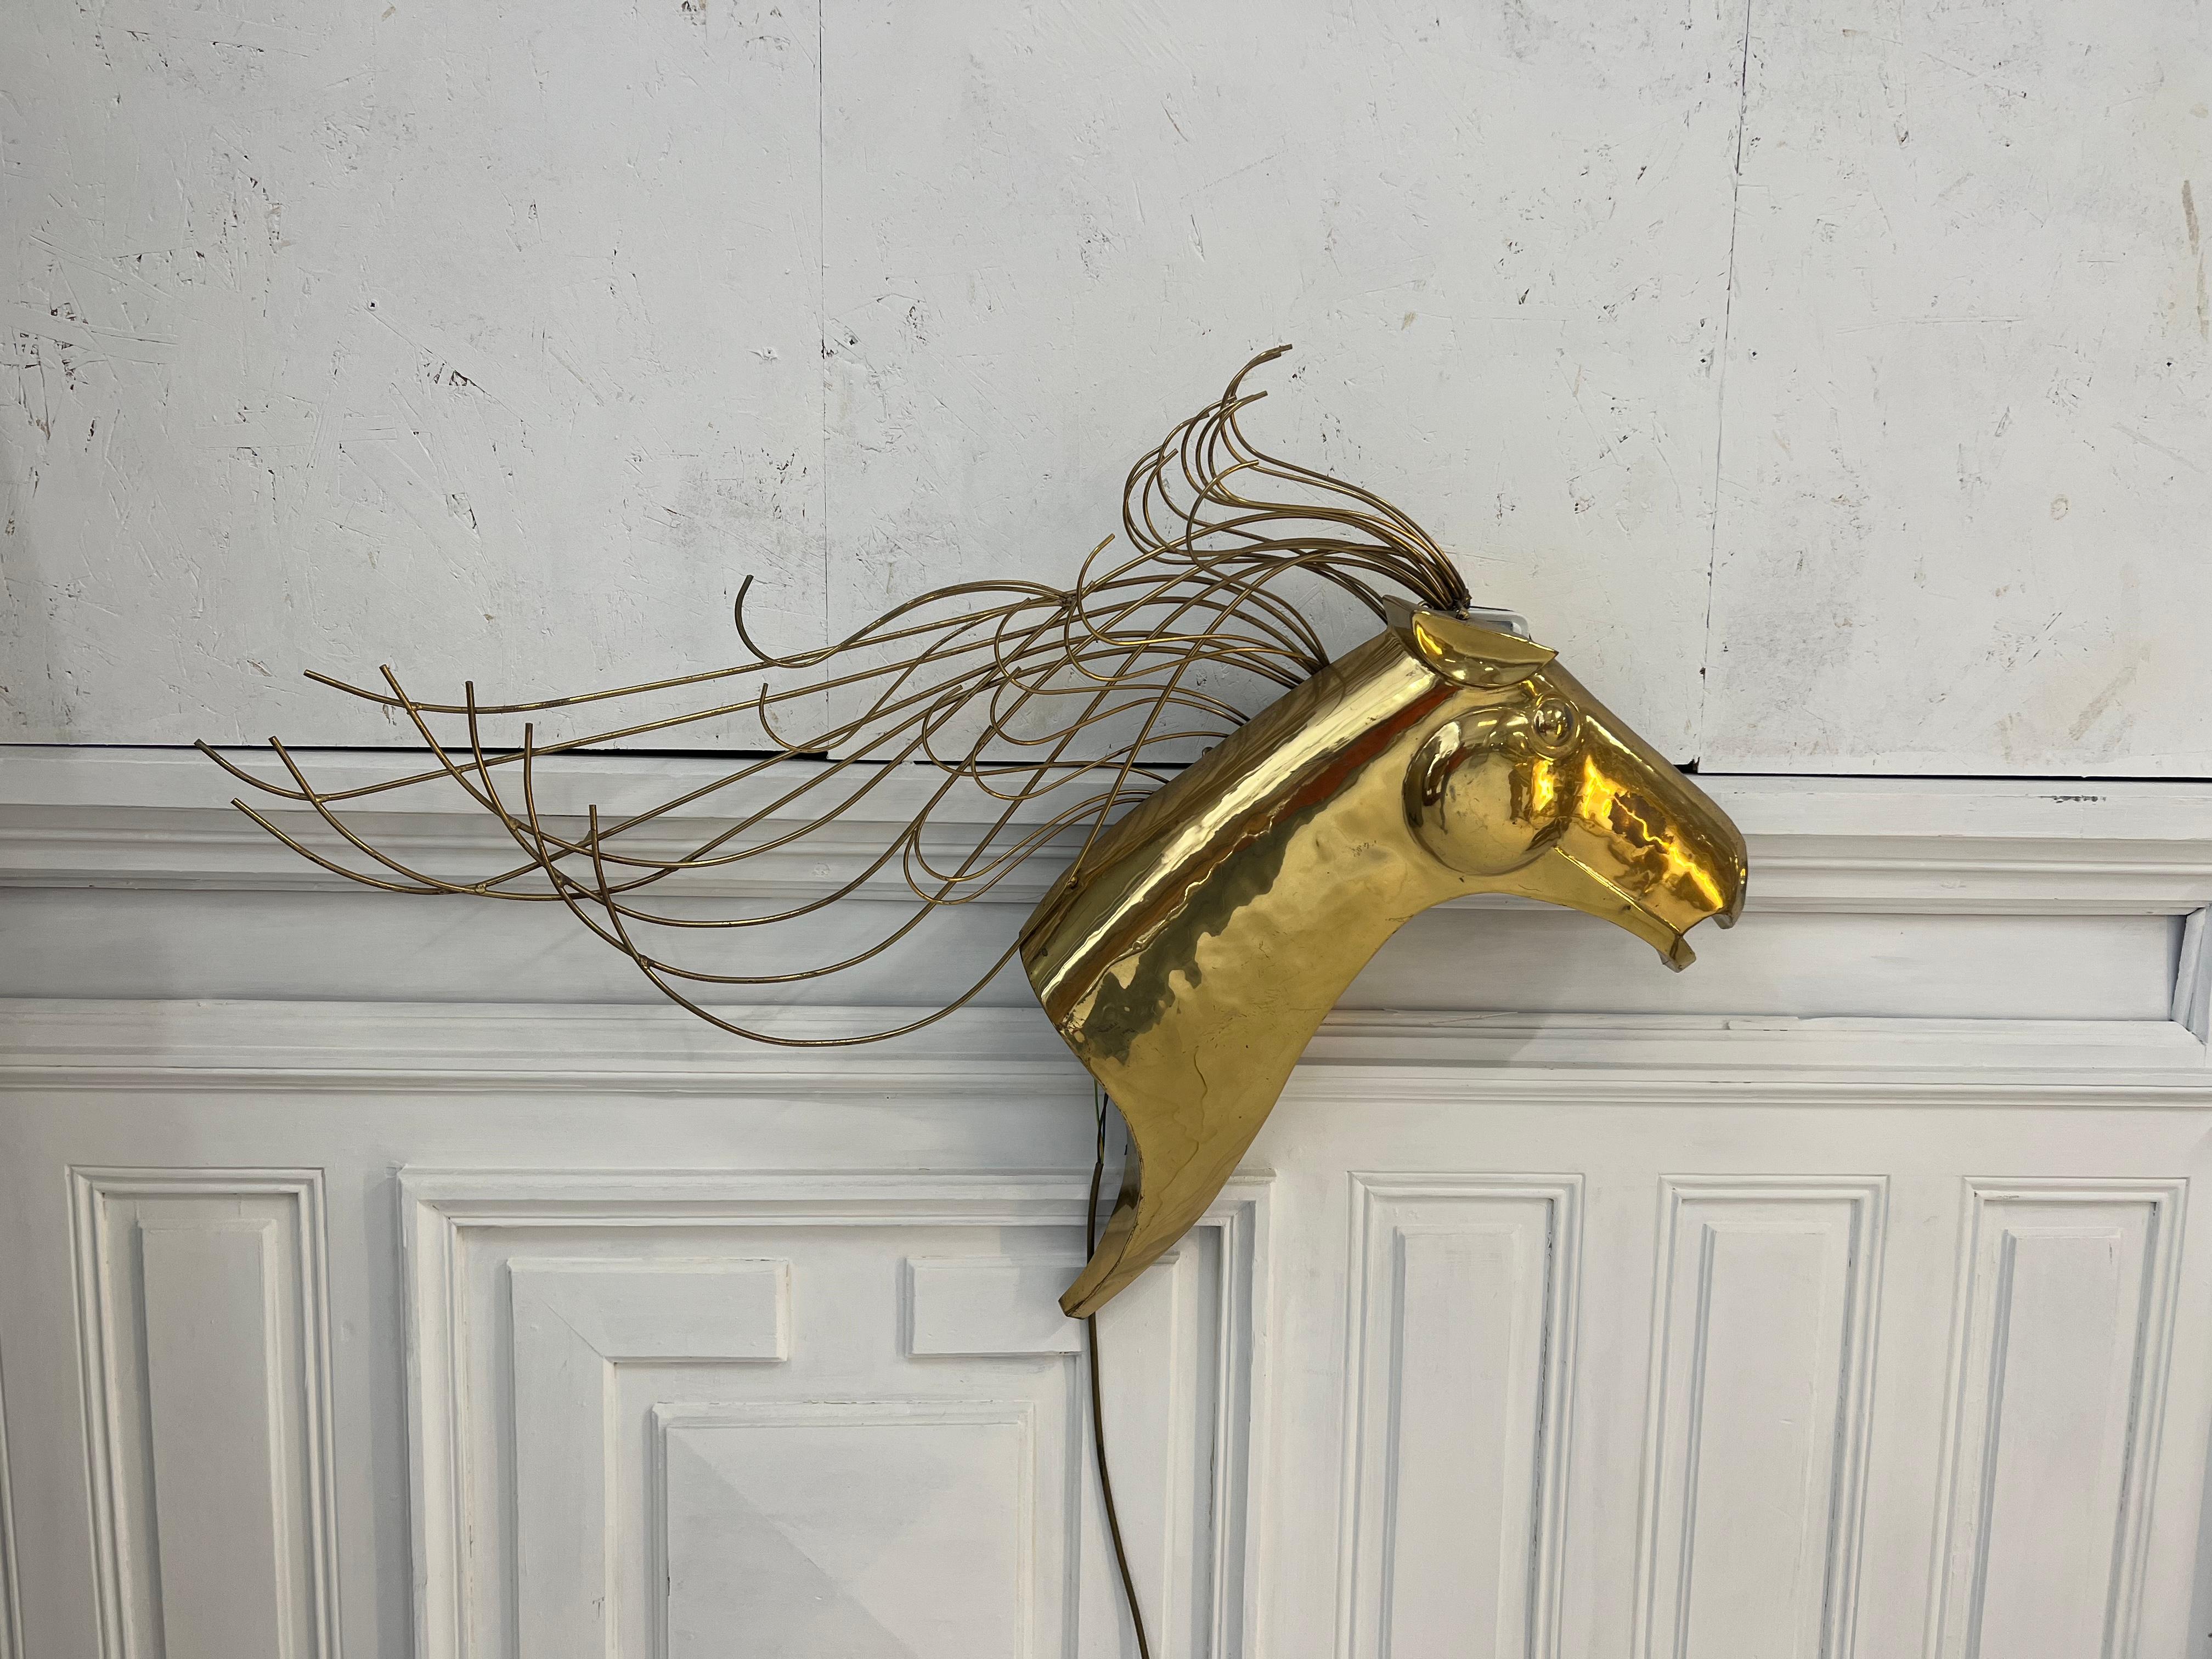 splendid brass sculpture by Curtis Jeré, signed and dated 1984
the mane is finely worked with brass wire
it will be a magnificent element of decoration, which will light up to give it a shine

Although the name Curtis Jeré is familiar to many as